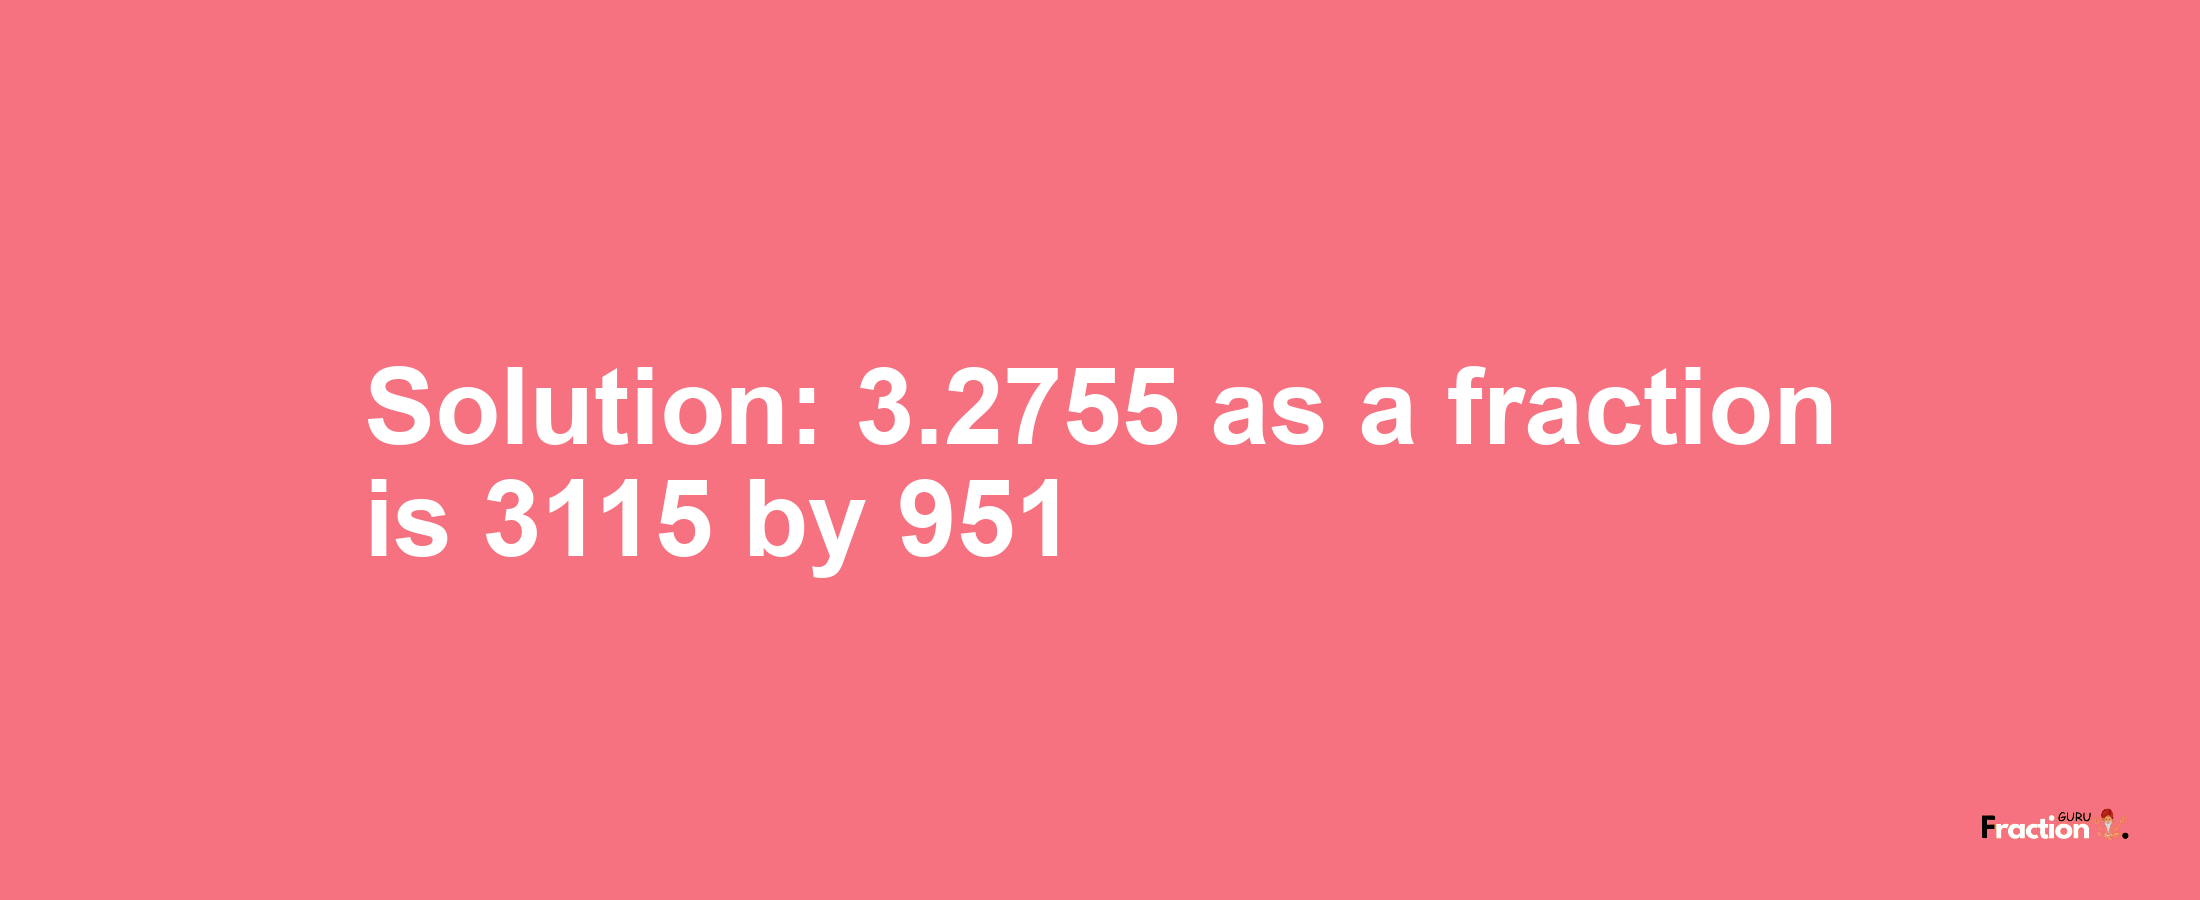 Solution:3.2755 as a fraction is 3115/951